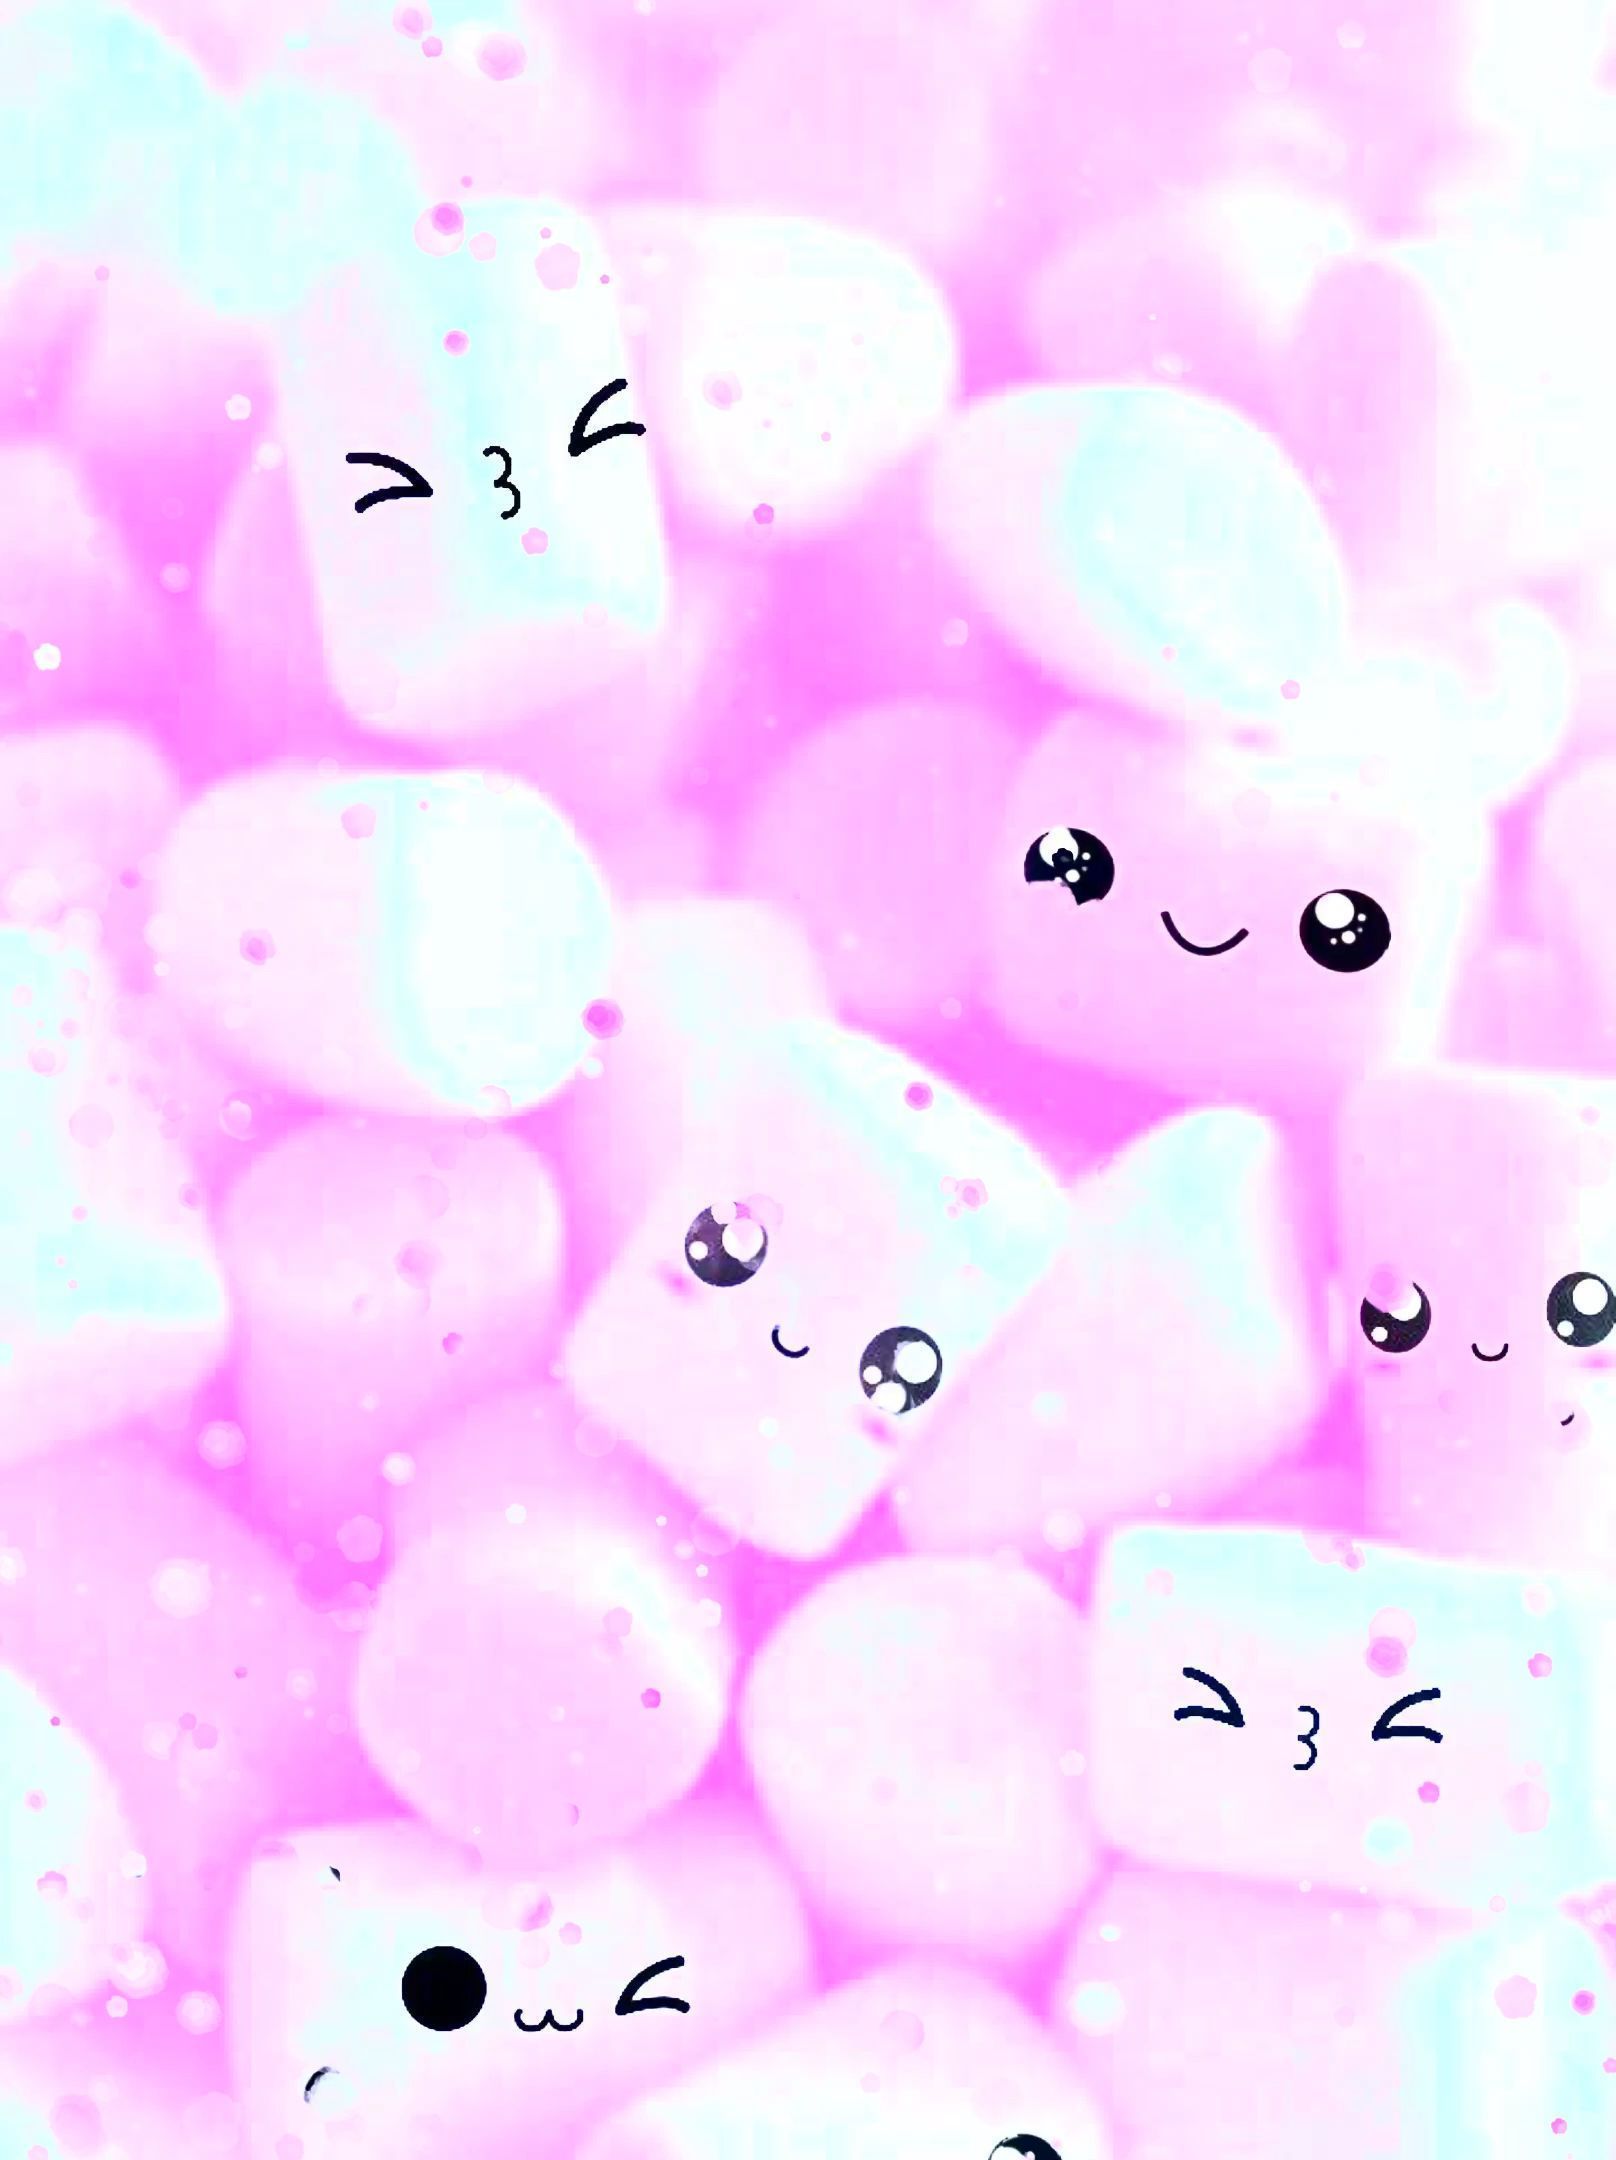 A wallpaper of cute pink and blue marshmallows with faces on them. - Marshmallows